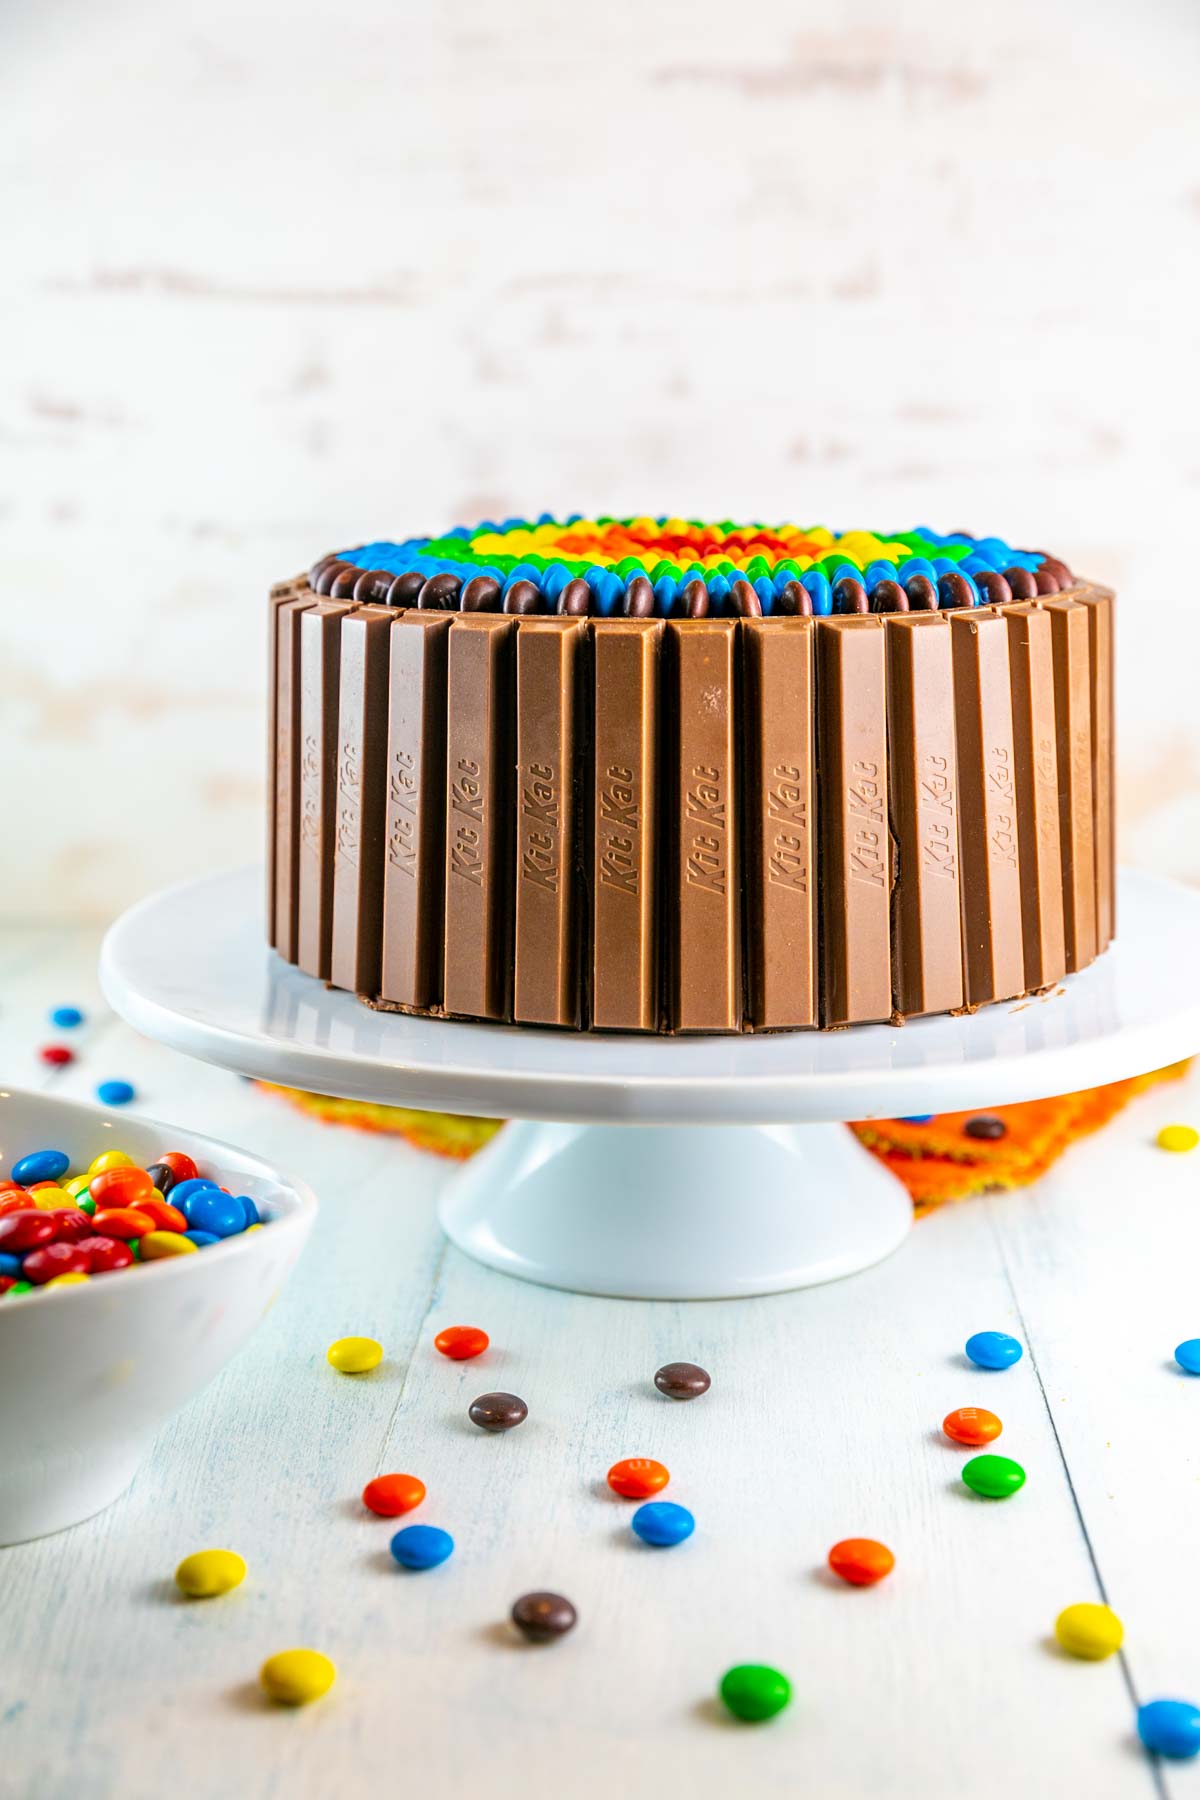 CANDYLAND BIRTHDAY CAKE | Just A Pinch Recipes